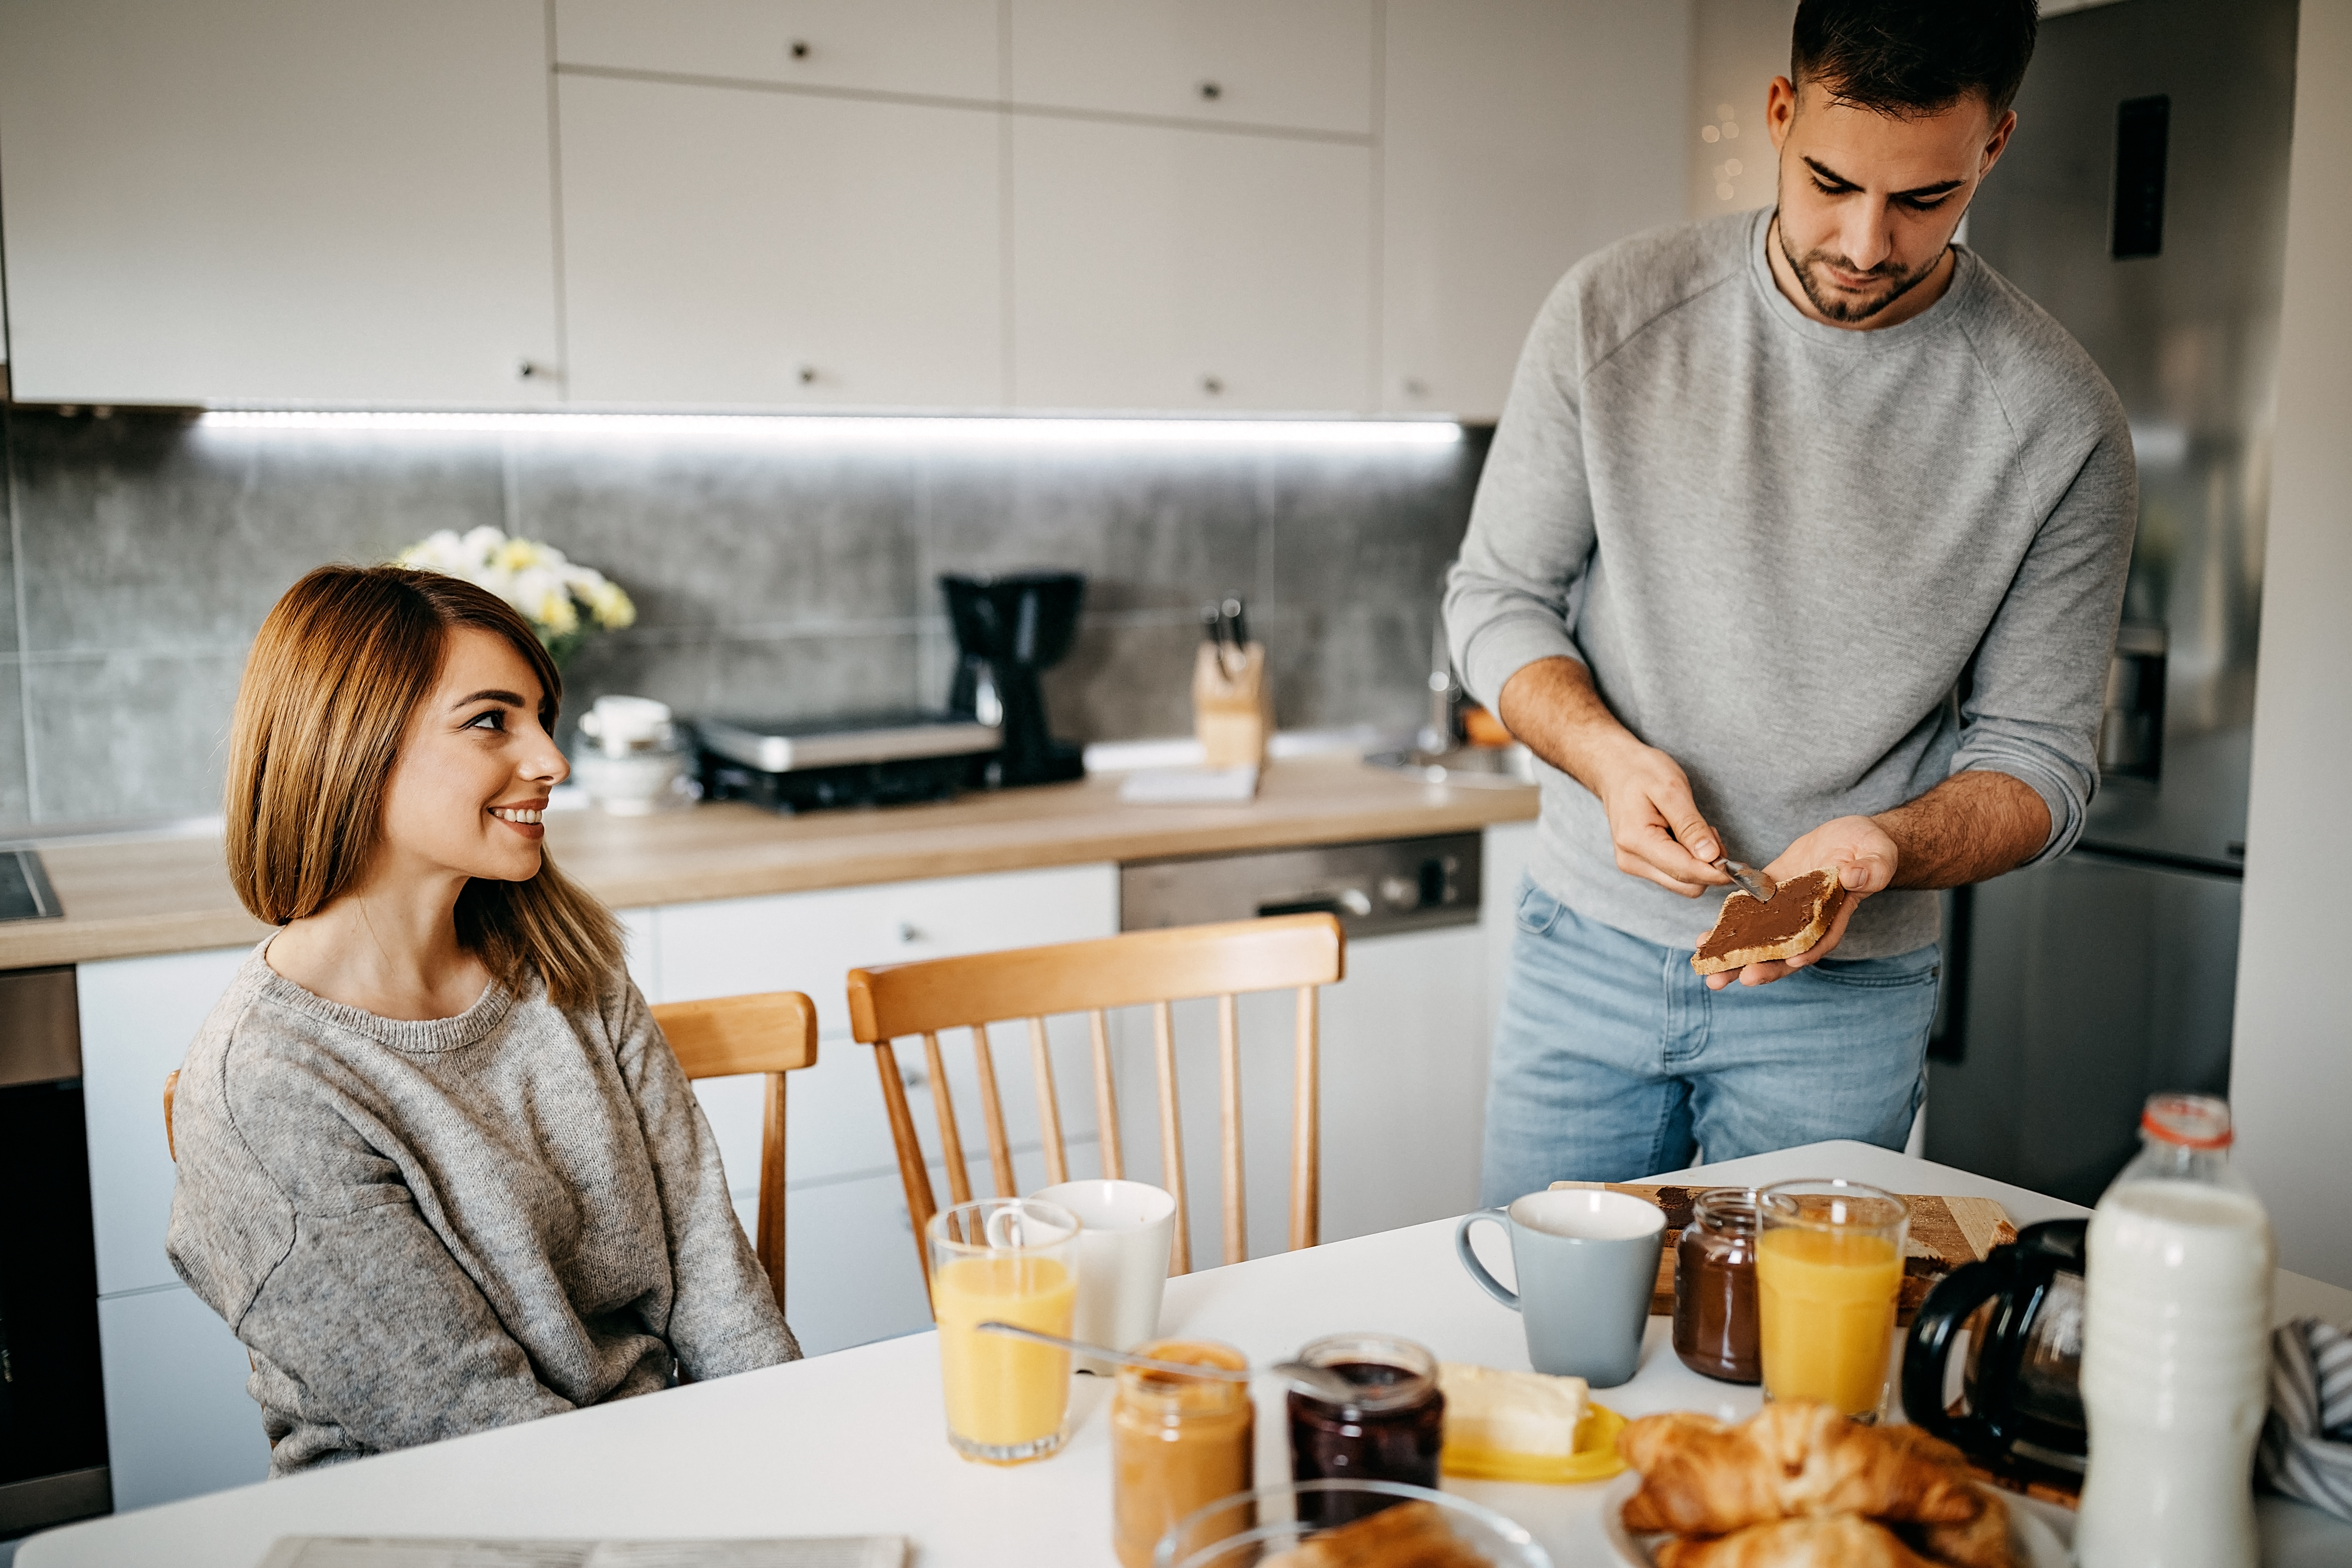 Couple making breakfast in kitchen, full of emotions | Source: Getty Images